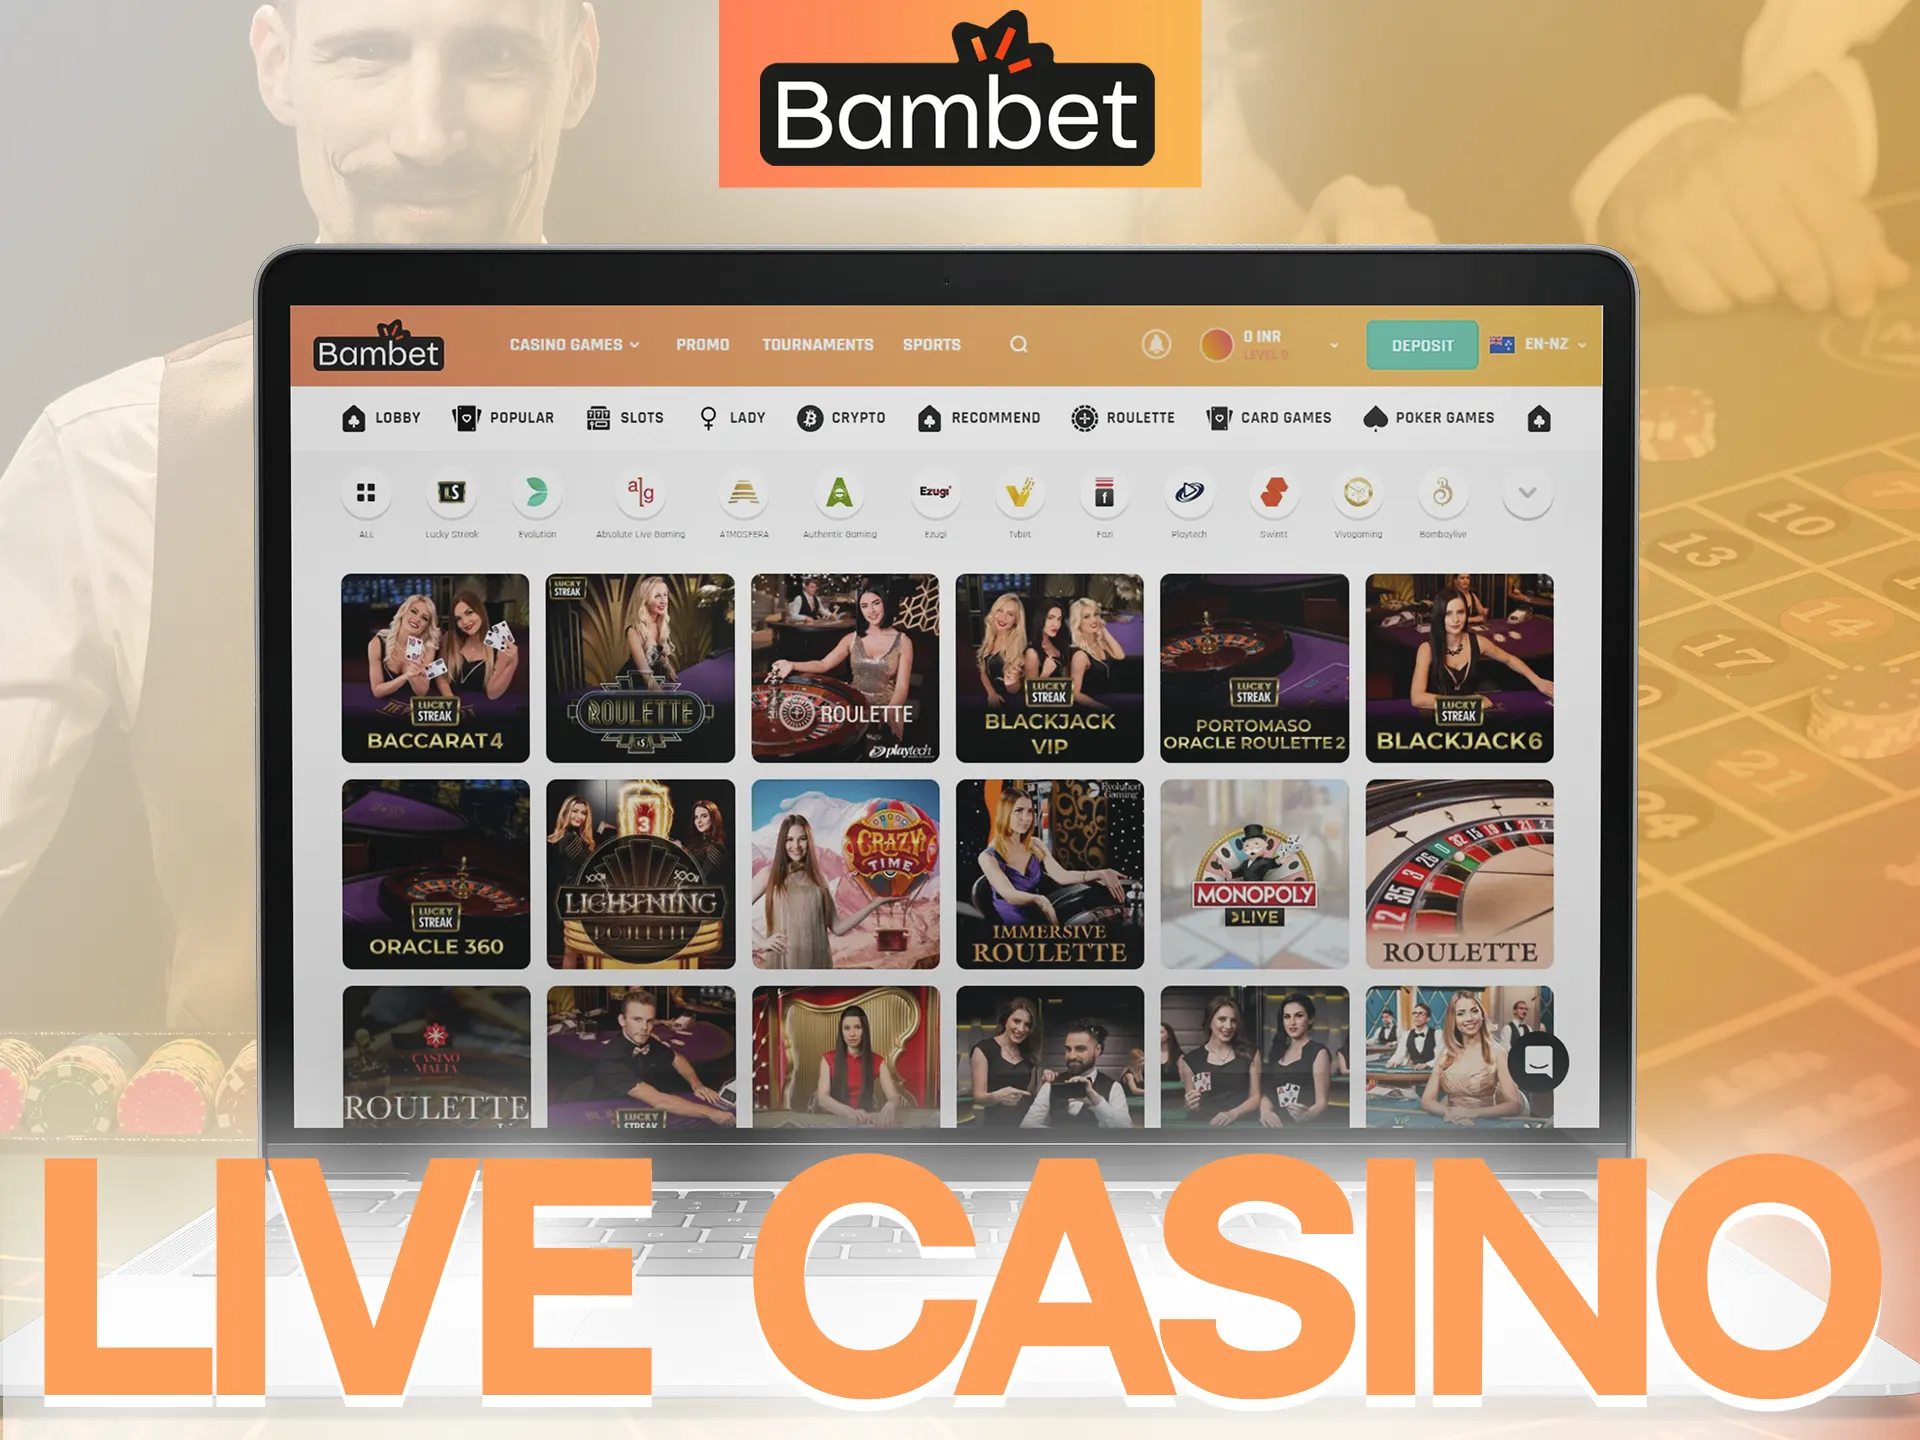 At Bambet you have the opportunity to play with dealers in the Live Casino.